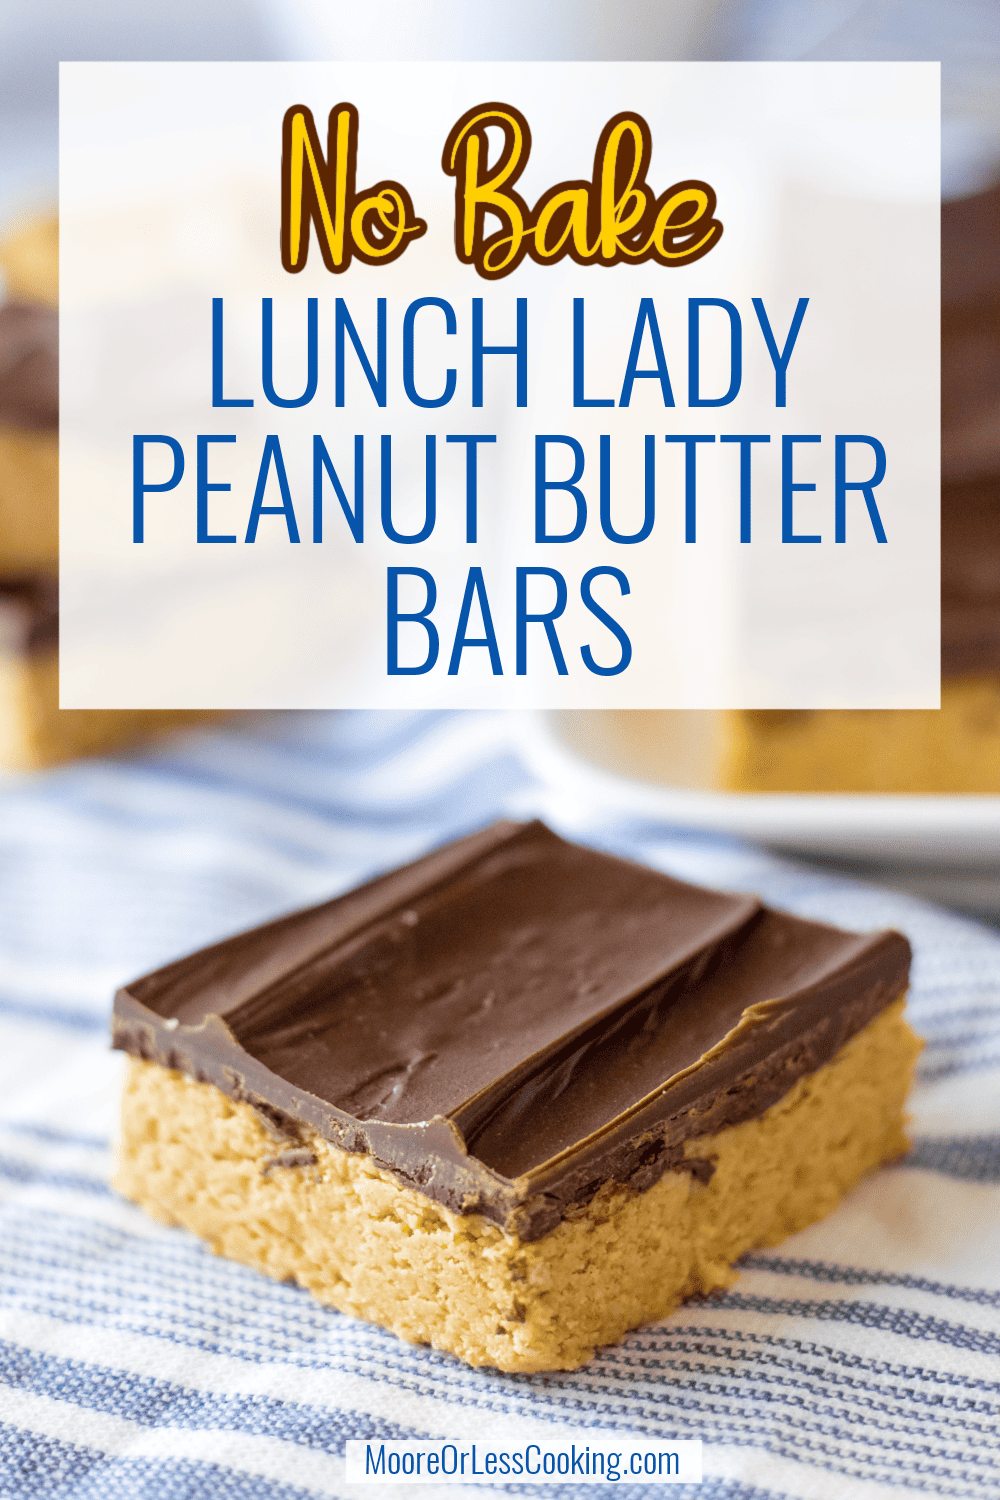 This easy school cafeteria recipe for No Bake Lunch Lady Peanut Butter Bars will bring back delicious memories of this classic sweet treat. A layer of thick, buttery and sweet peanut butter batter is topped with a smooth chocolate ganache in this nostalgic dessert. via @Mooreorlesscook